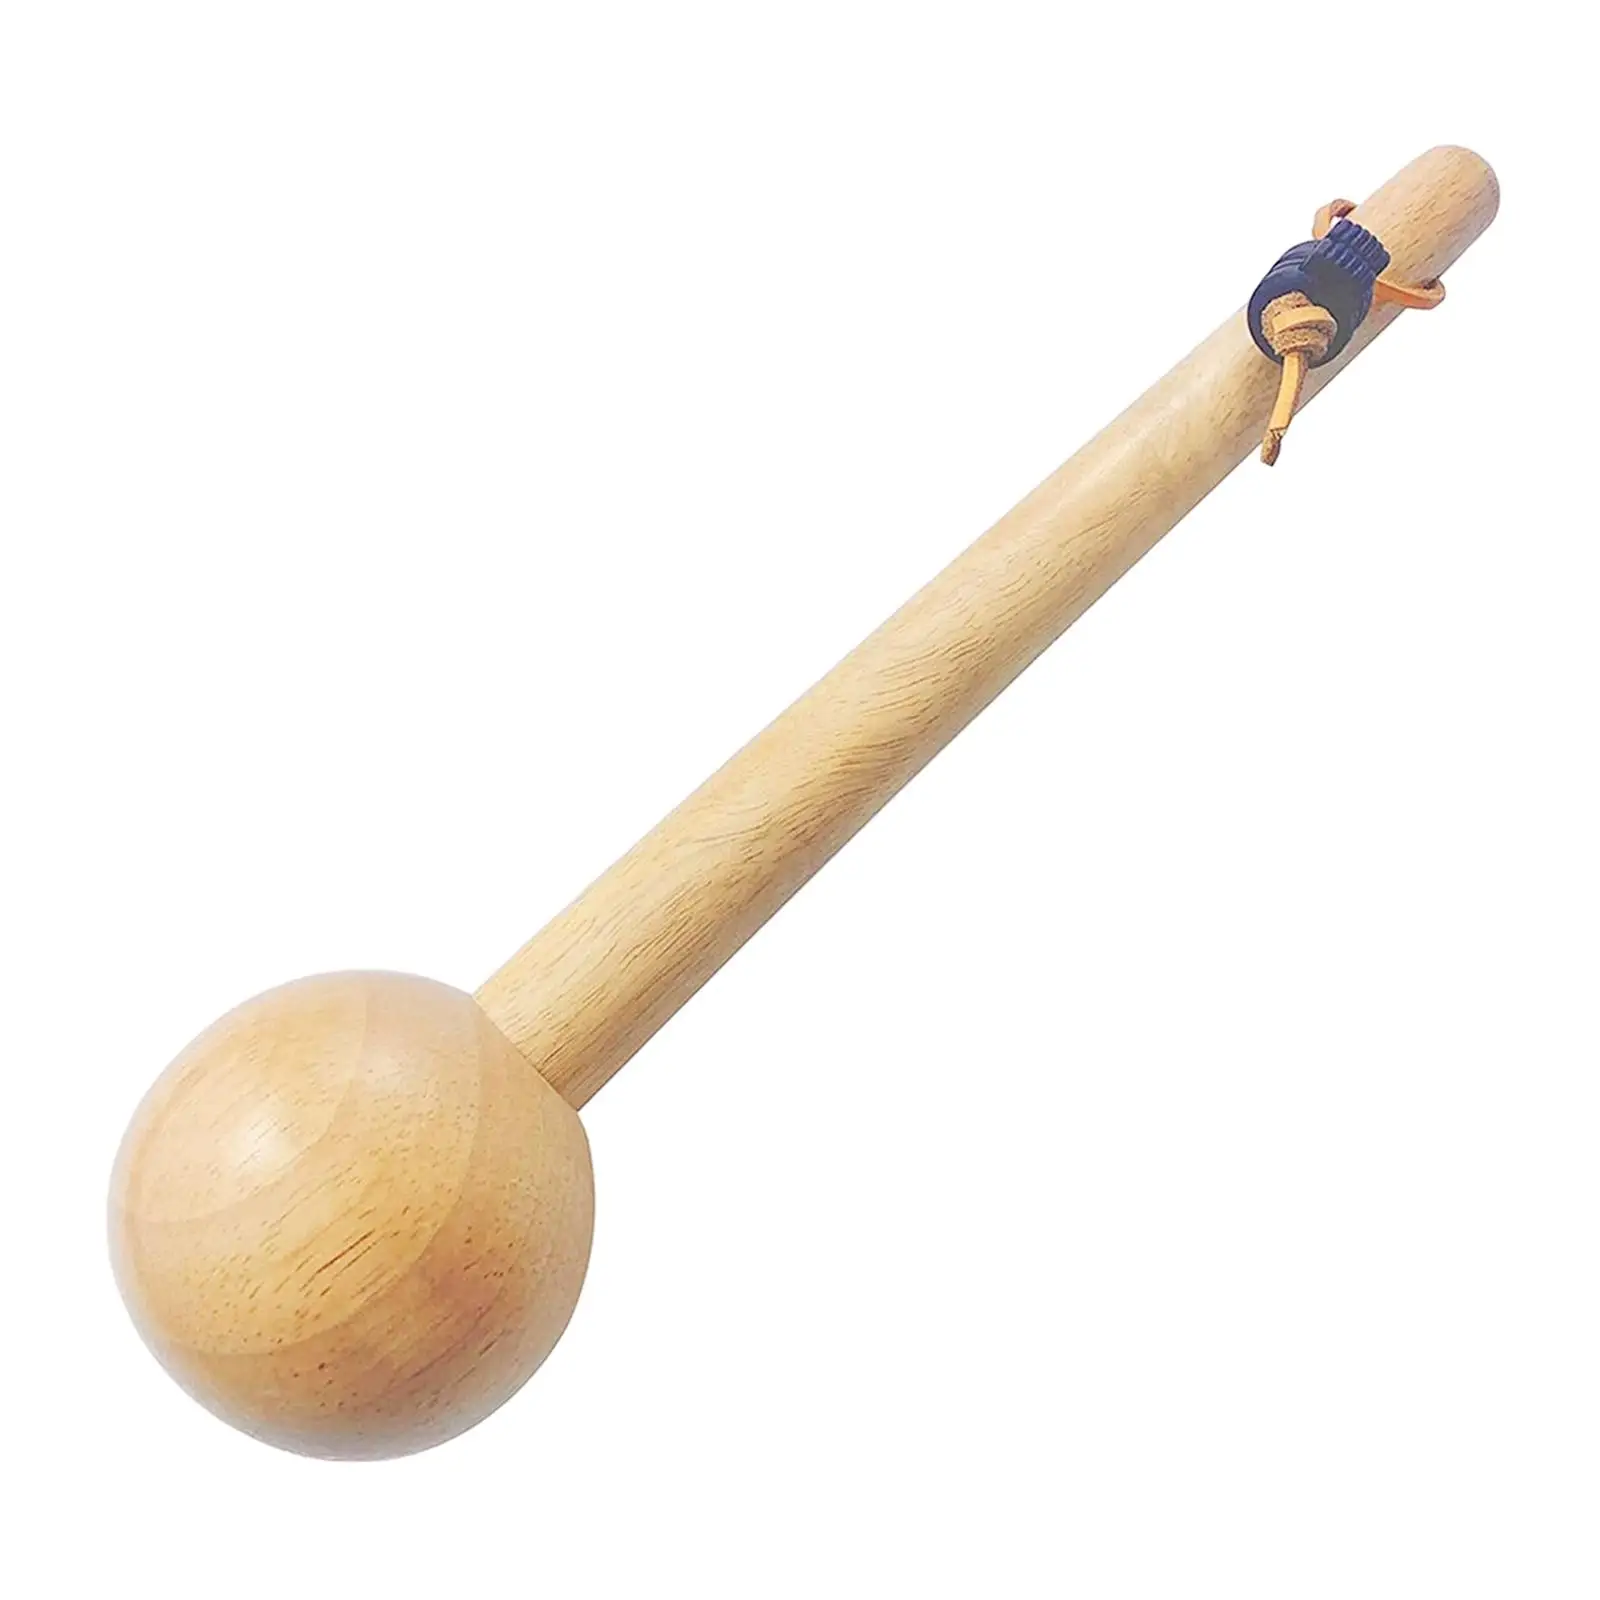 Rubber Wooden Softball Glove Mallet Equipment Sports Training Aid 12inch Portable Baseball Hammer for Practice Glove Care